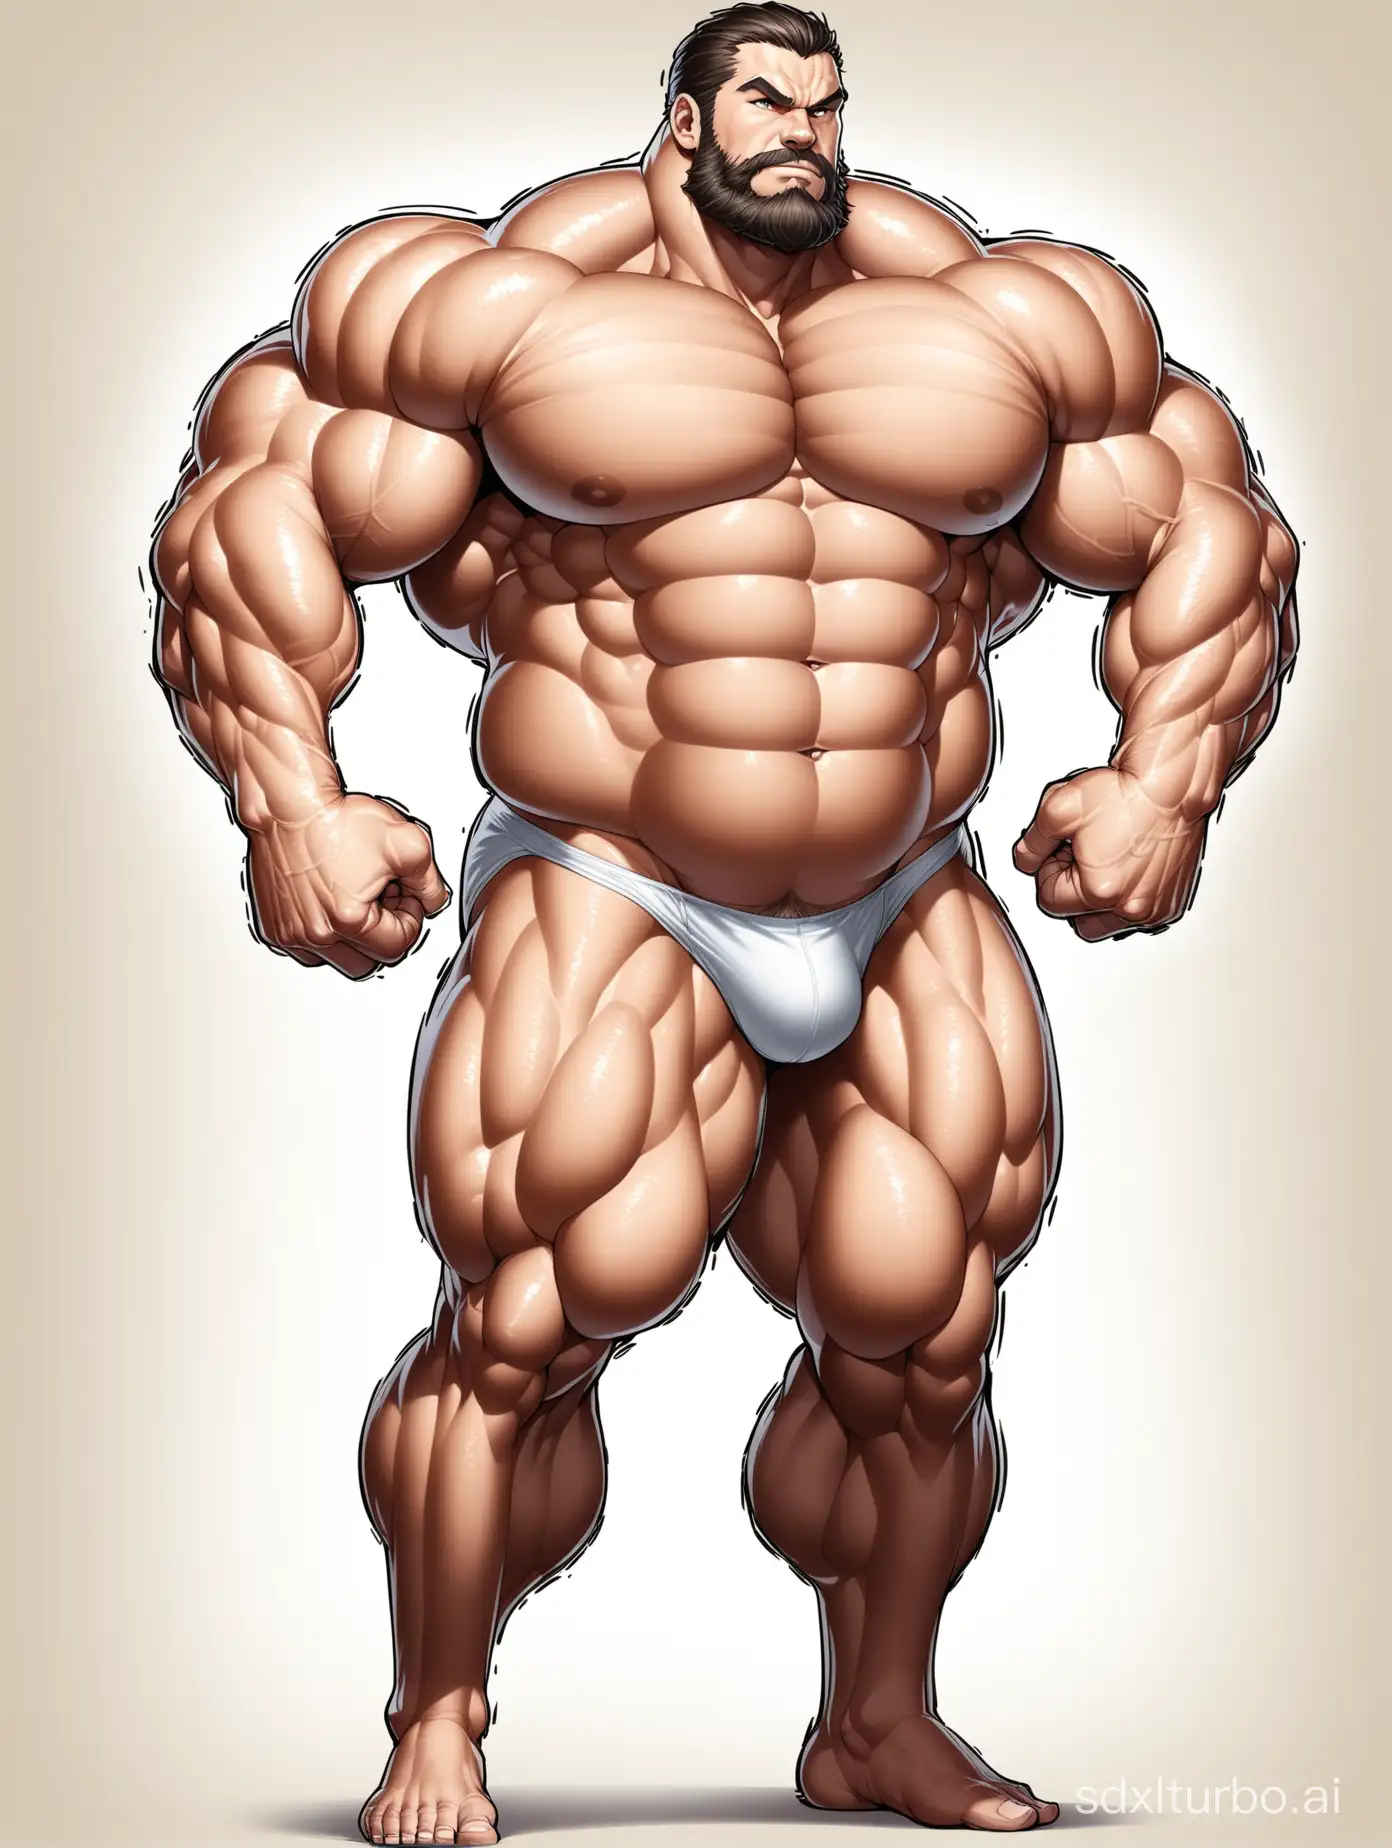 White skin and massive muscle stud, much bodyhair. Huge and giant and Strong body. Very Long and strong legs. 2m tall. very Big Chest. very Big biceps. 8-pack abs. Very Massive muscle Body. Wearing underwear. he is giant tall. very fat. very fat. very fat. Full Body diagram. very long strong legs.very long legs.very long legs. raise his arms to show his huge biceps. wearing white shoes. raise his arms to show his huge biceps.very old man.very handsome men.